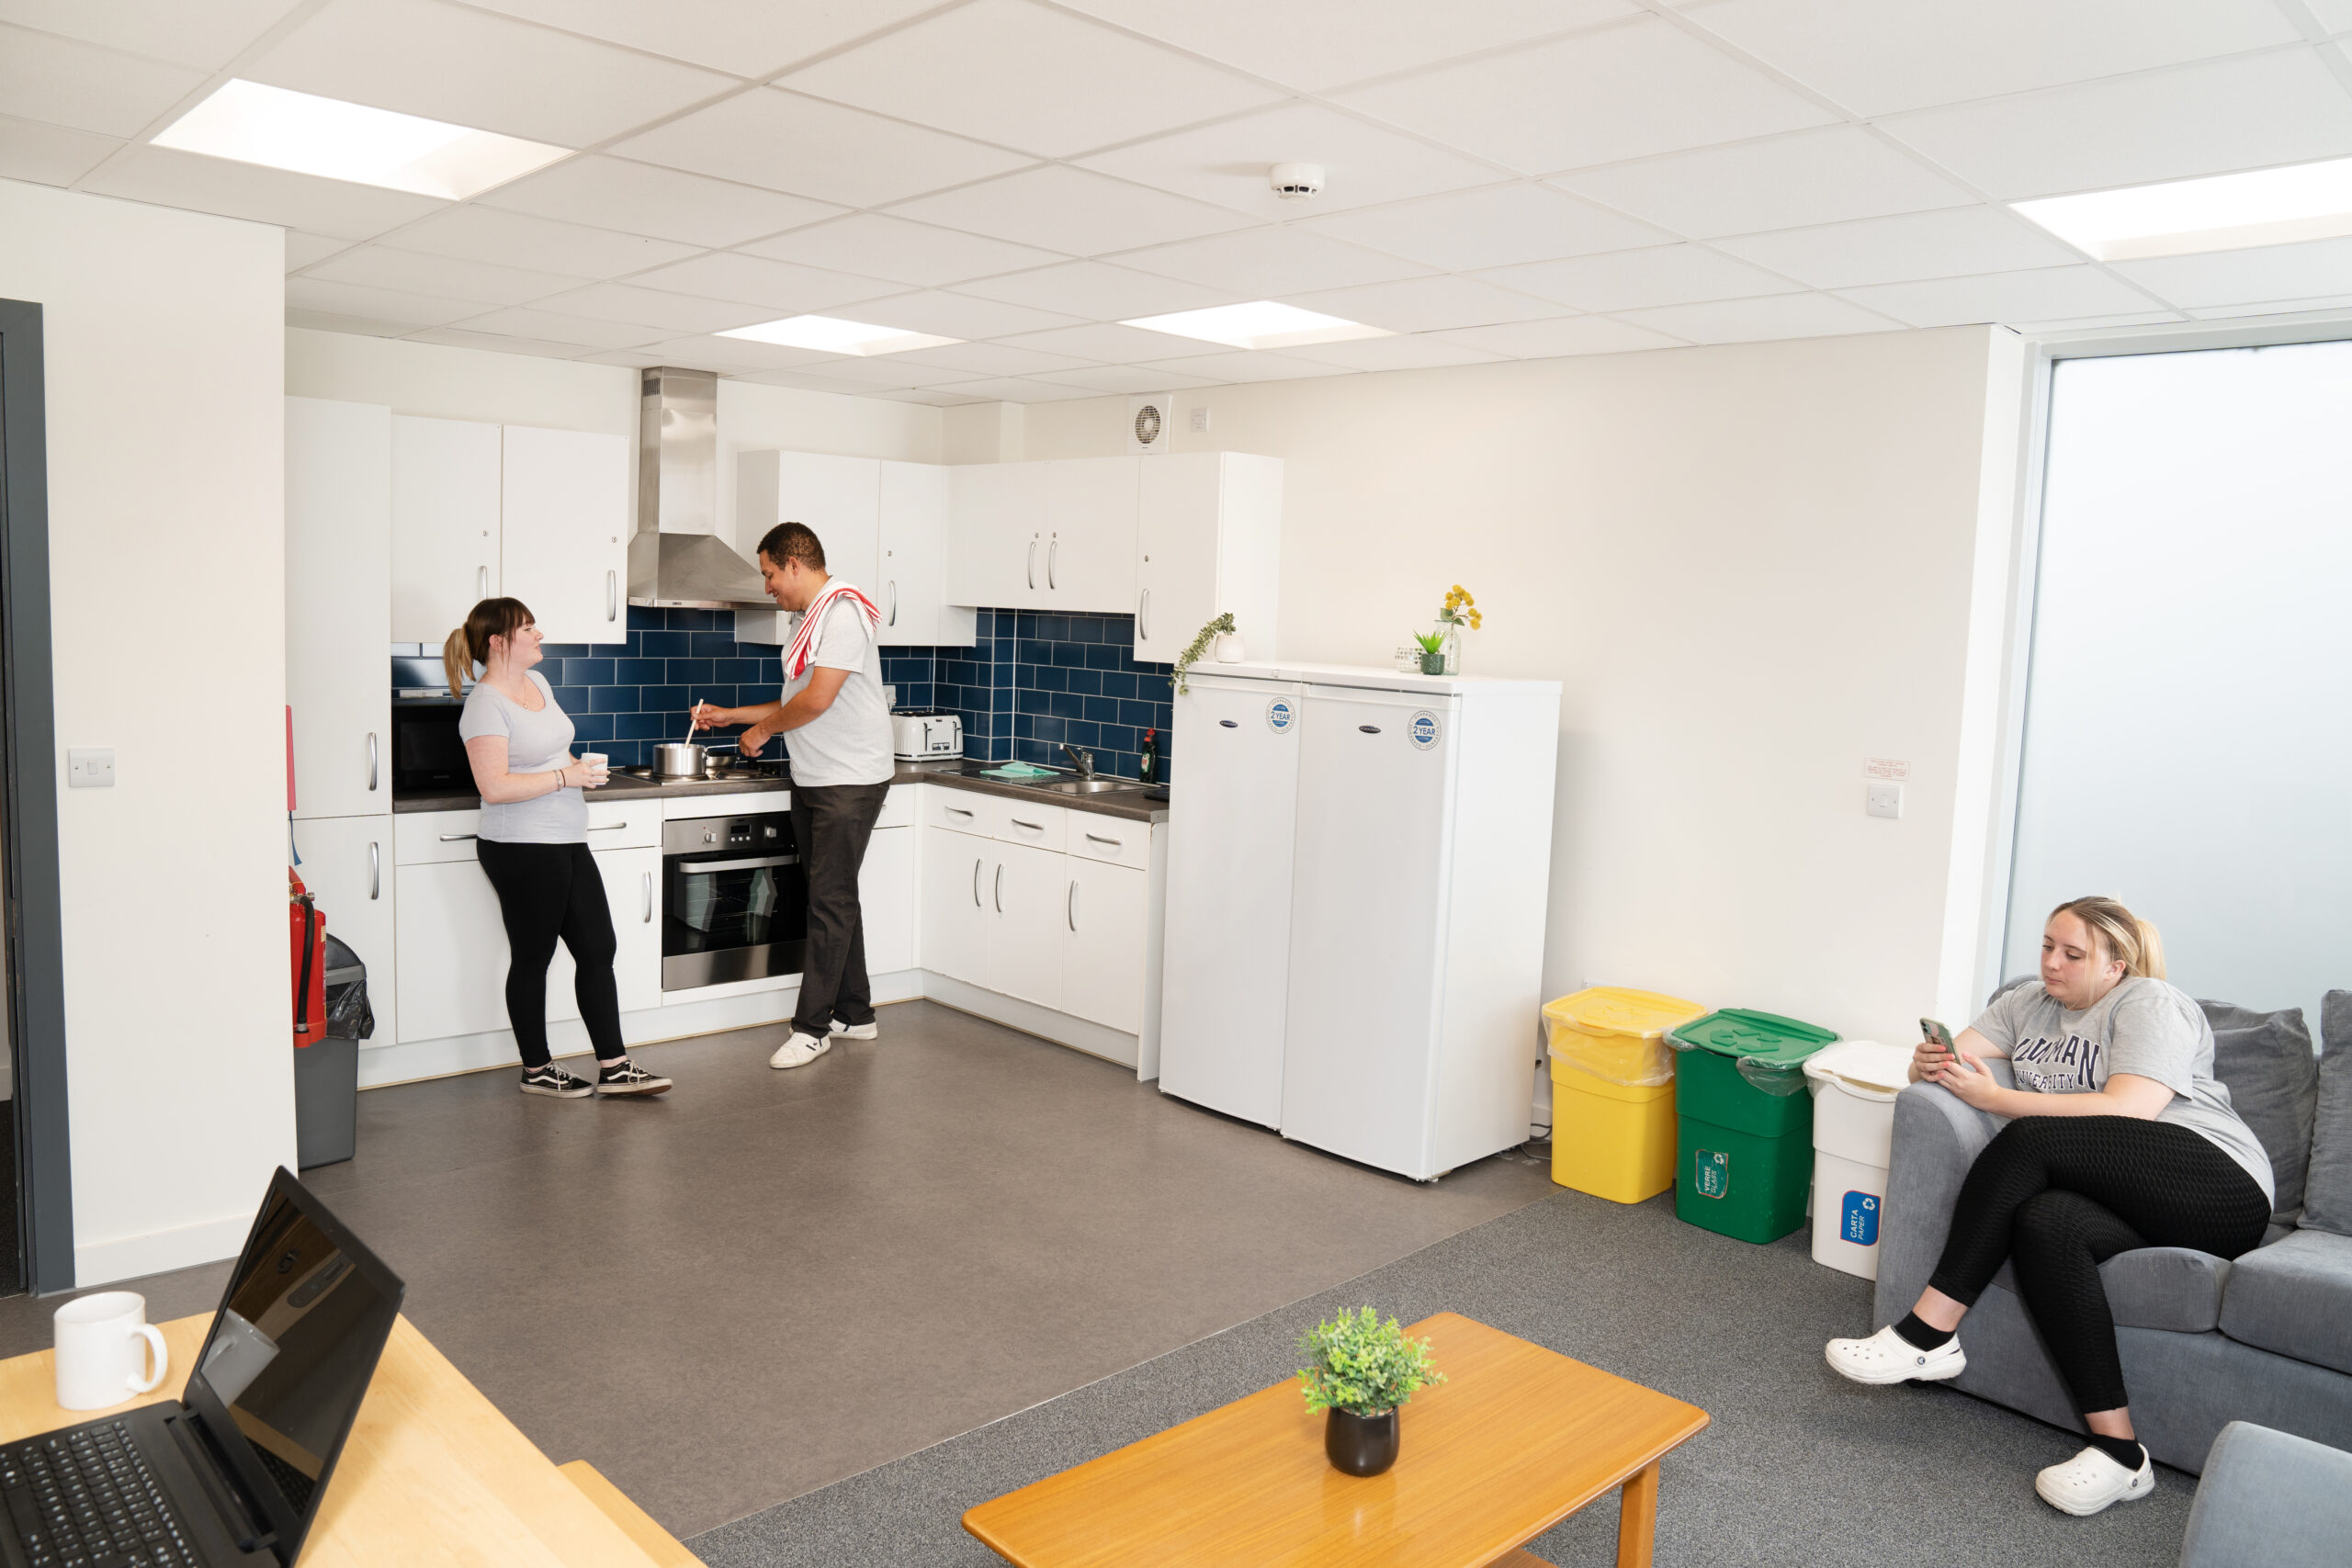 Students in the shared kitchen of Cofton Hall